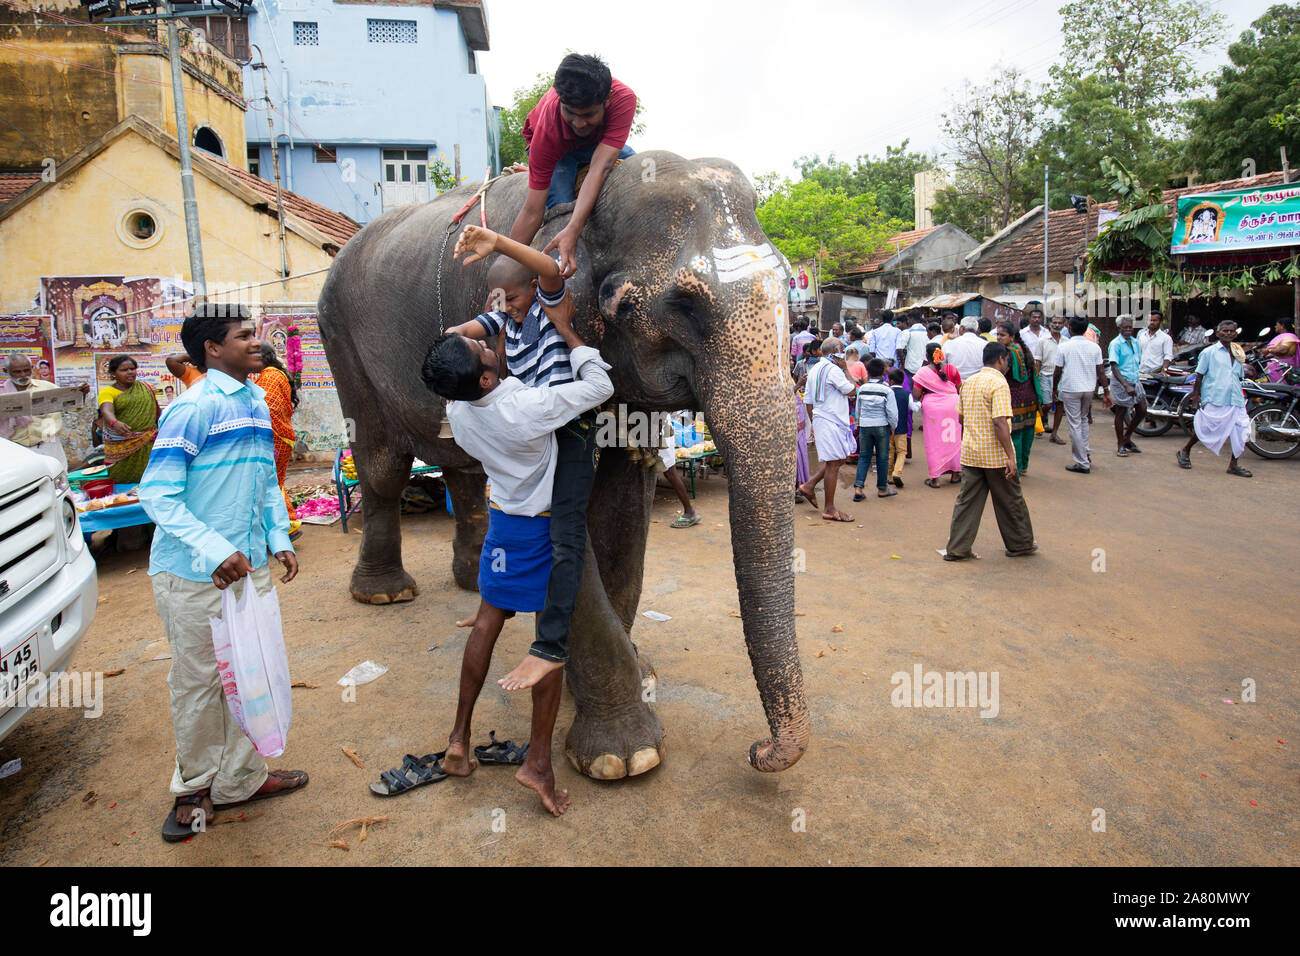 Man trying to lift a young boy on temple elephant during Kutti Kudithal Festival in Trichy, Tamil Nadu, India Stock Photo